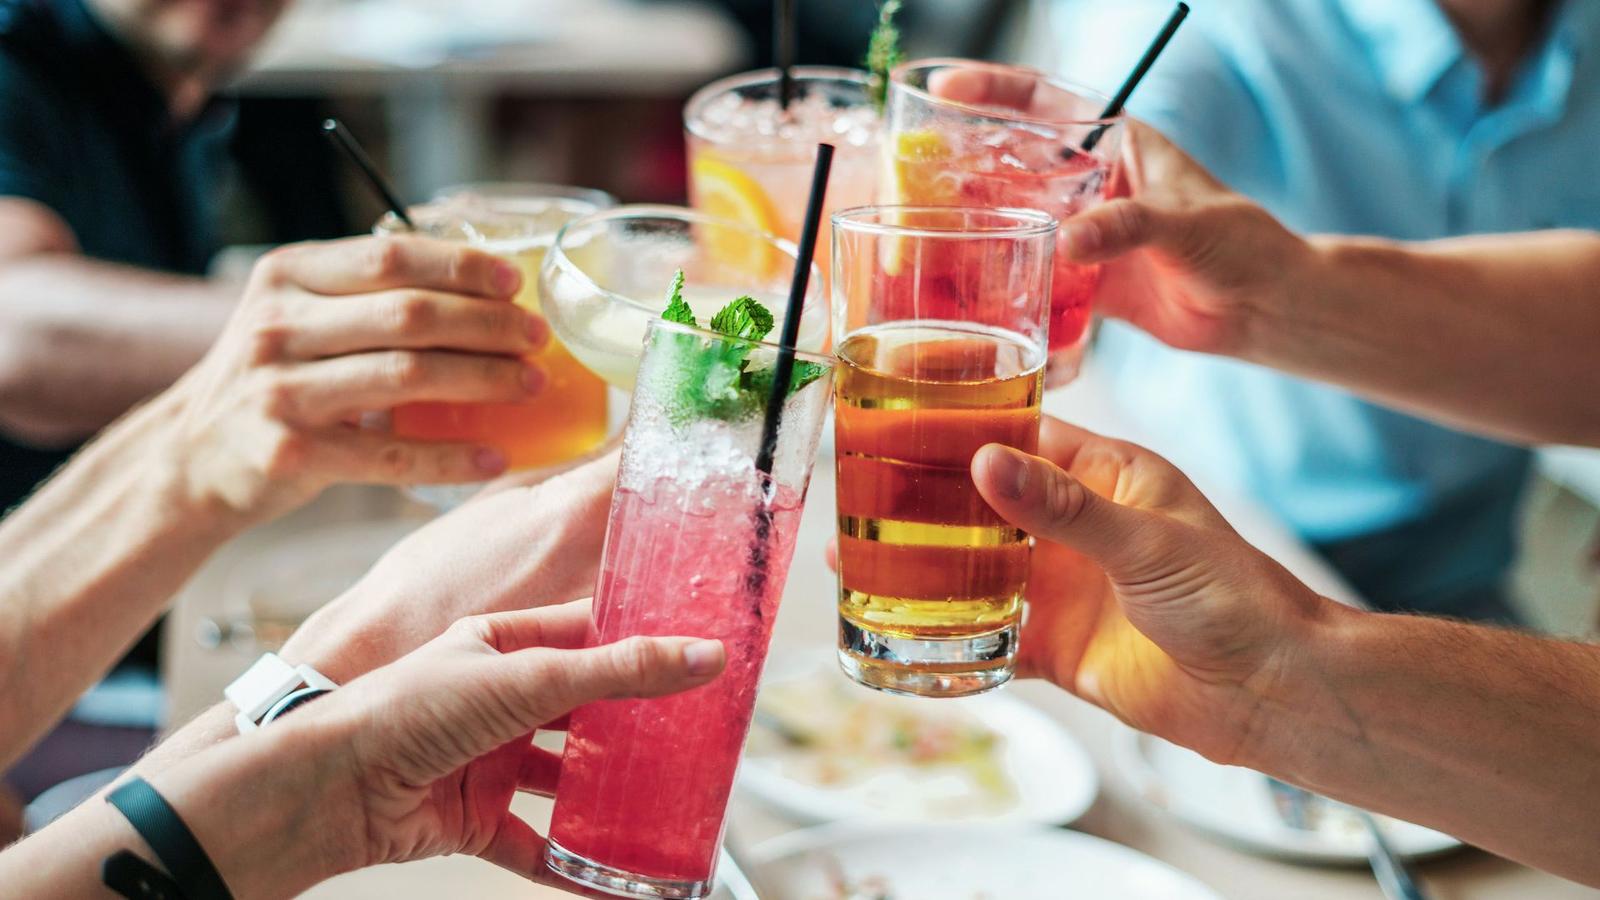 How Well-Rounded Is Your Knowledge? Take This General Knowledge Quiz to Find Out! Toasting cocktails